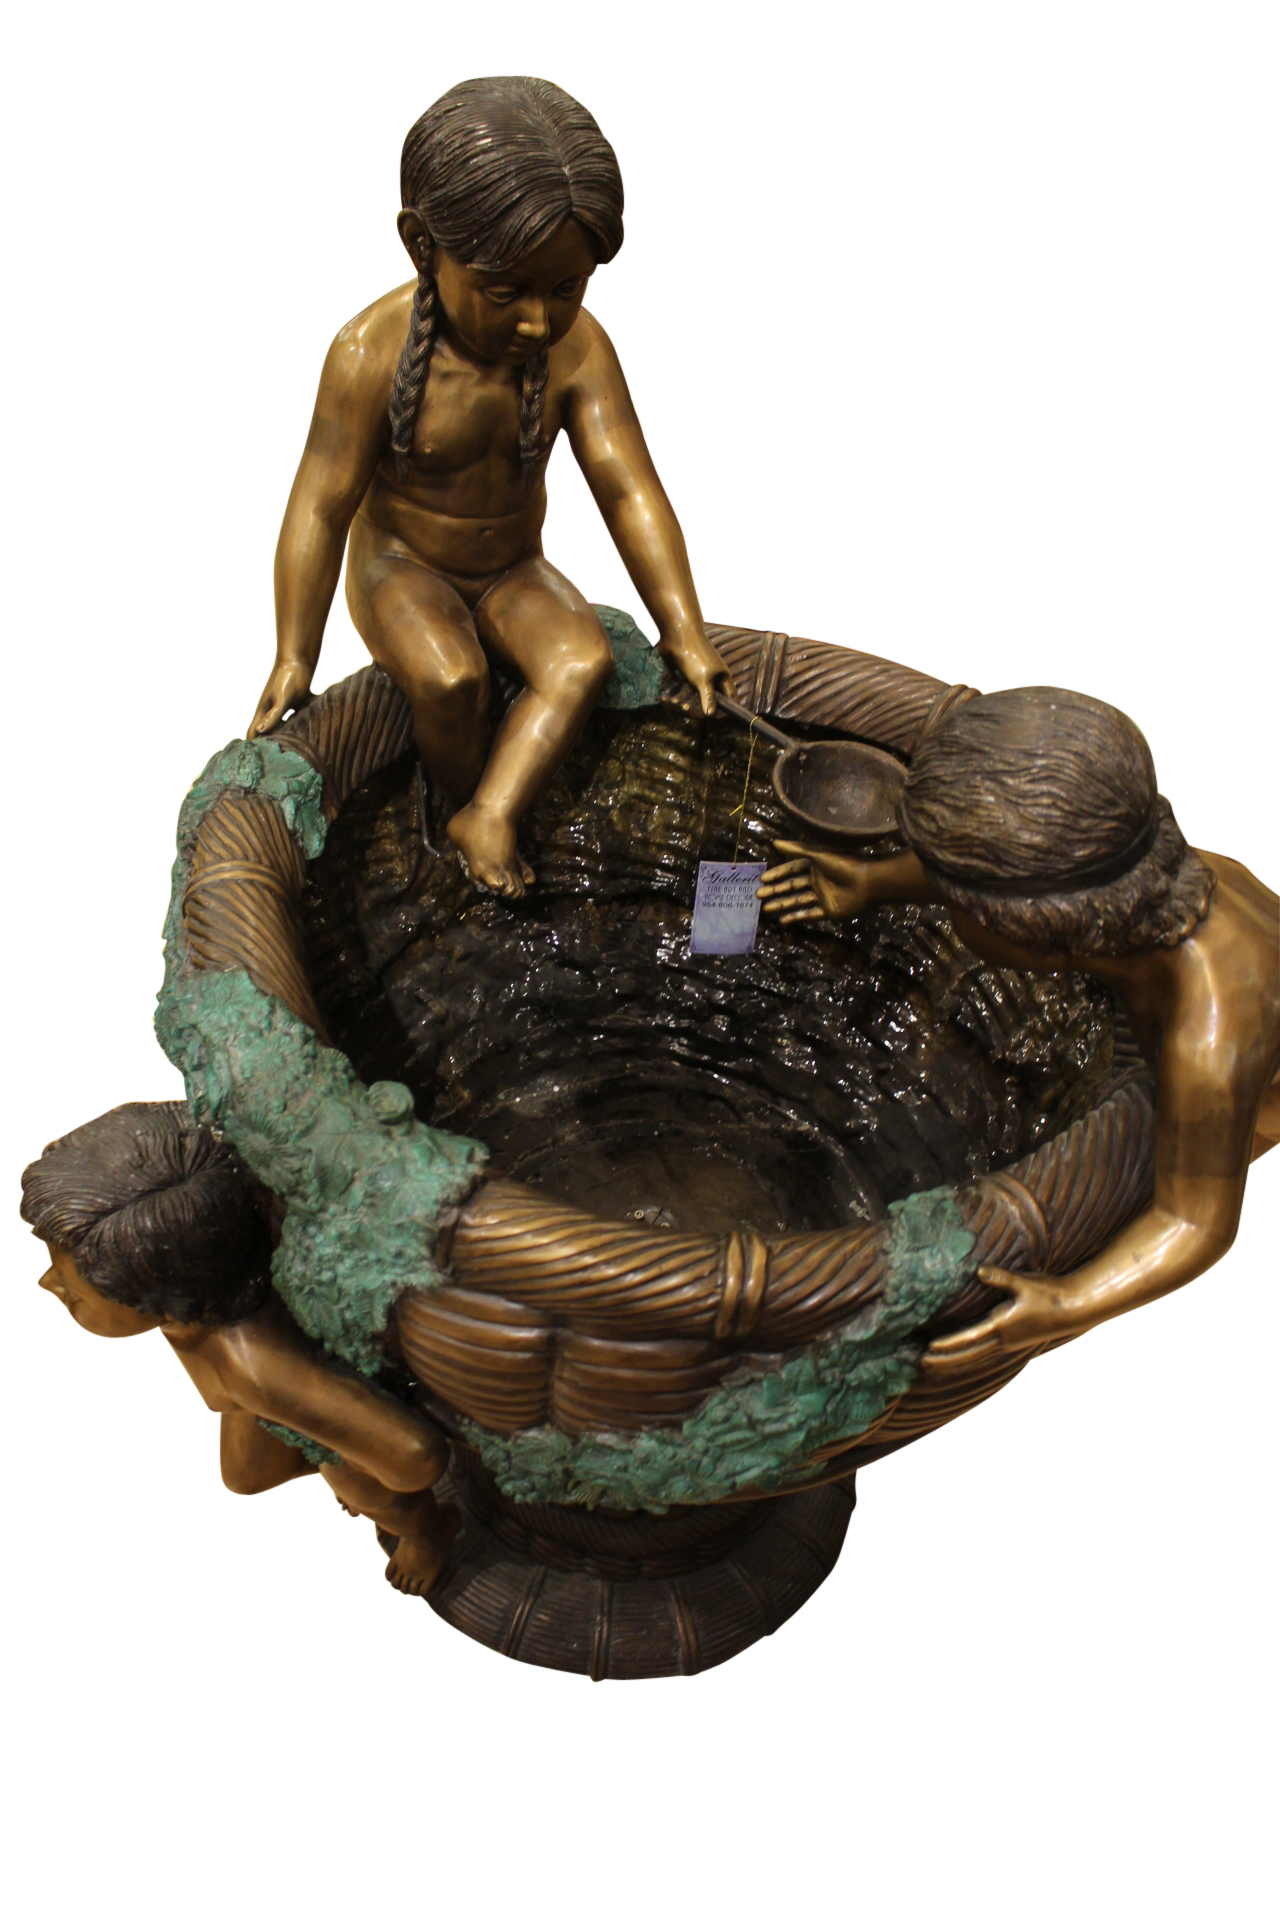 Kids Playing in Fountain Bronze Statue -  Size: 38&quot;L x 32&quot;W x 45&quot;H. - image 1 of 14